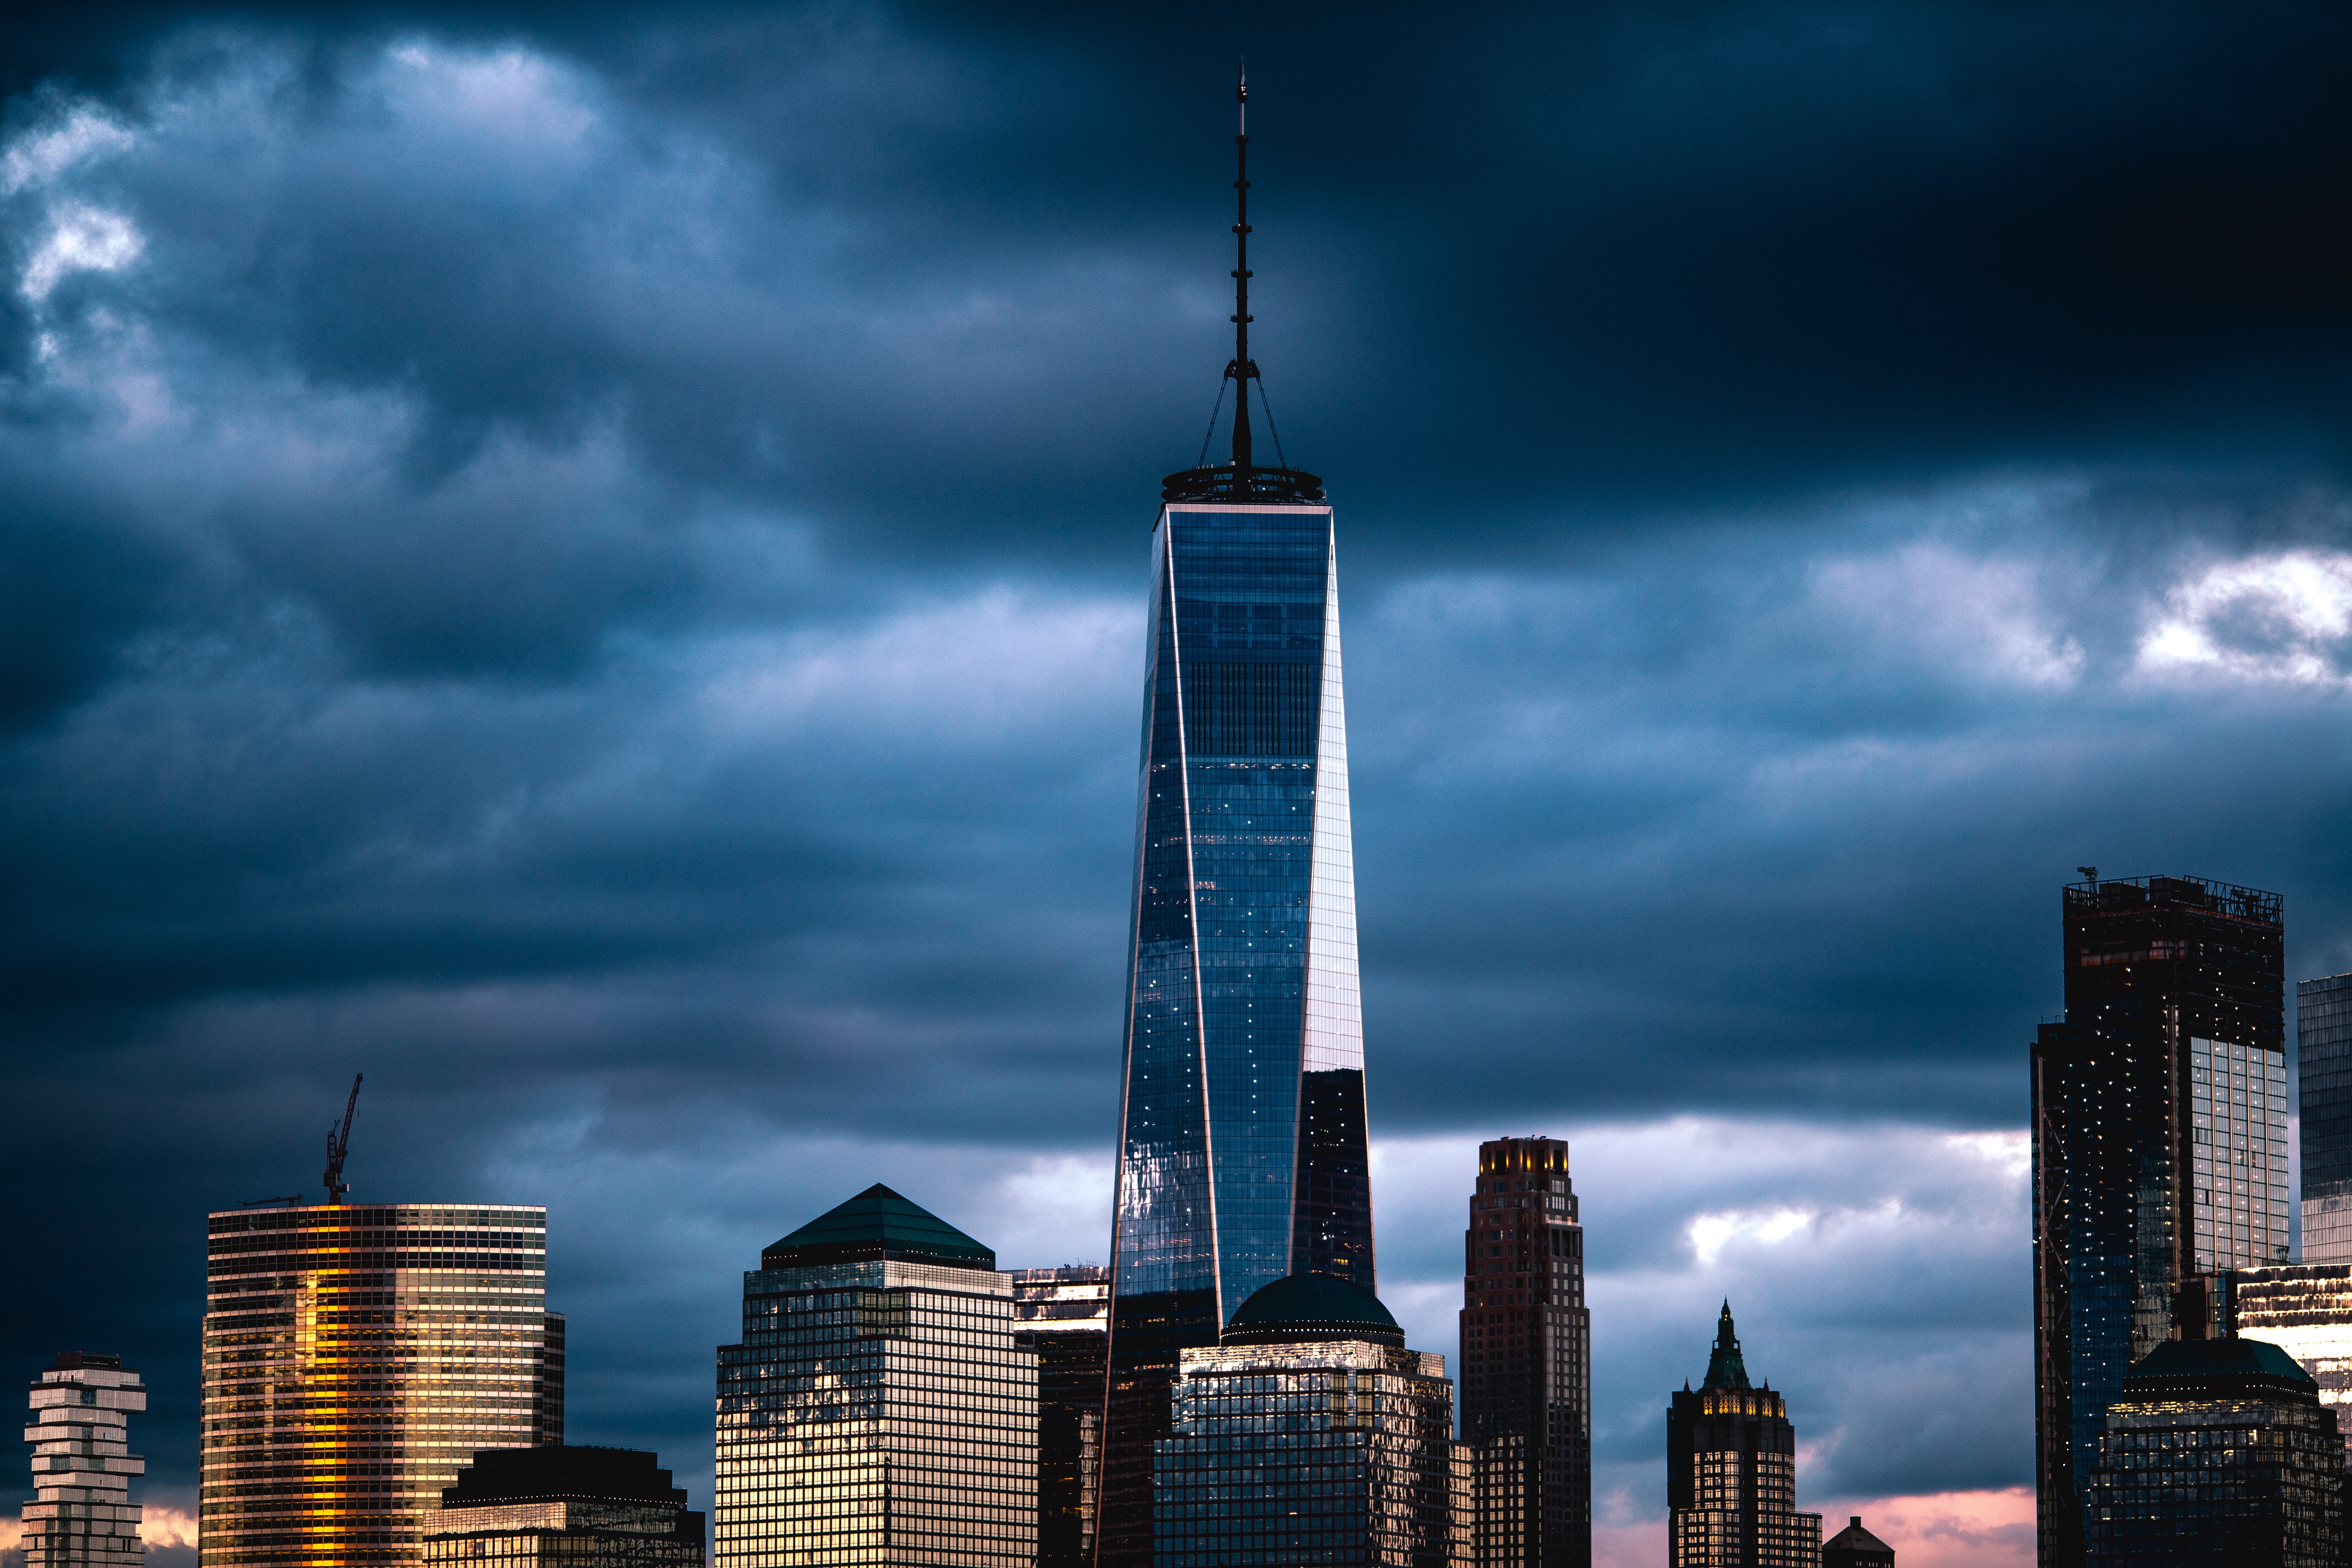 Widescreen image united states, new york, overcast, clouds